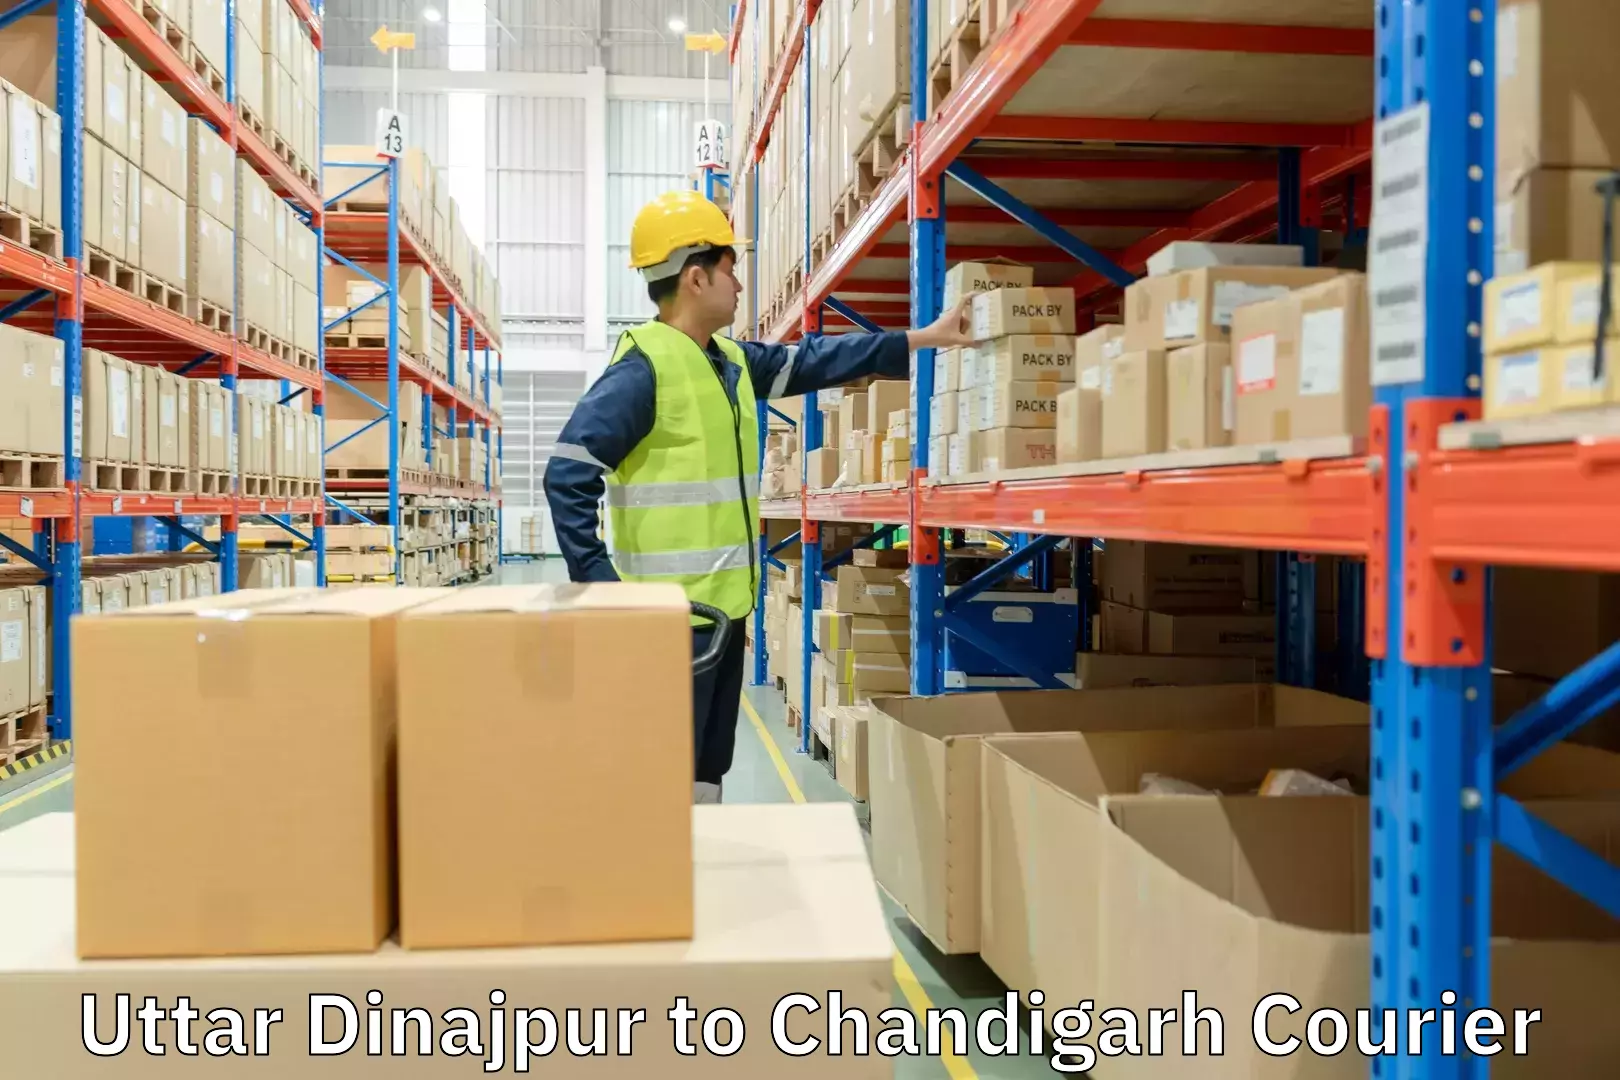 Quality courier partnerships Uttar Dinajpur to Chandigarh